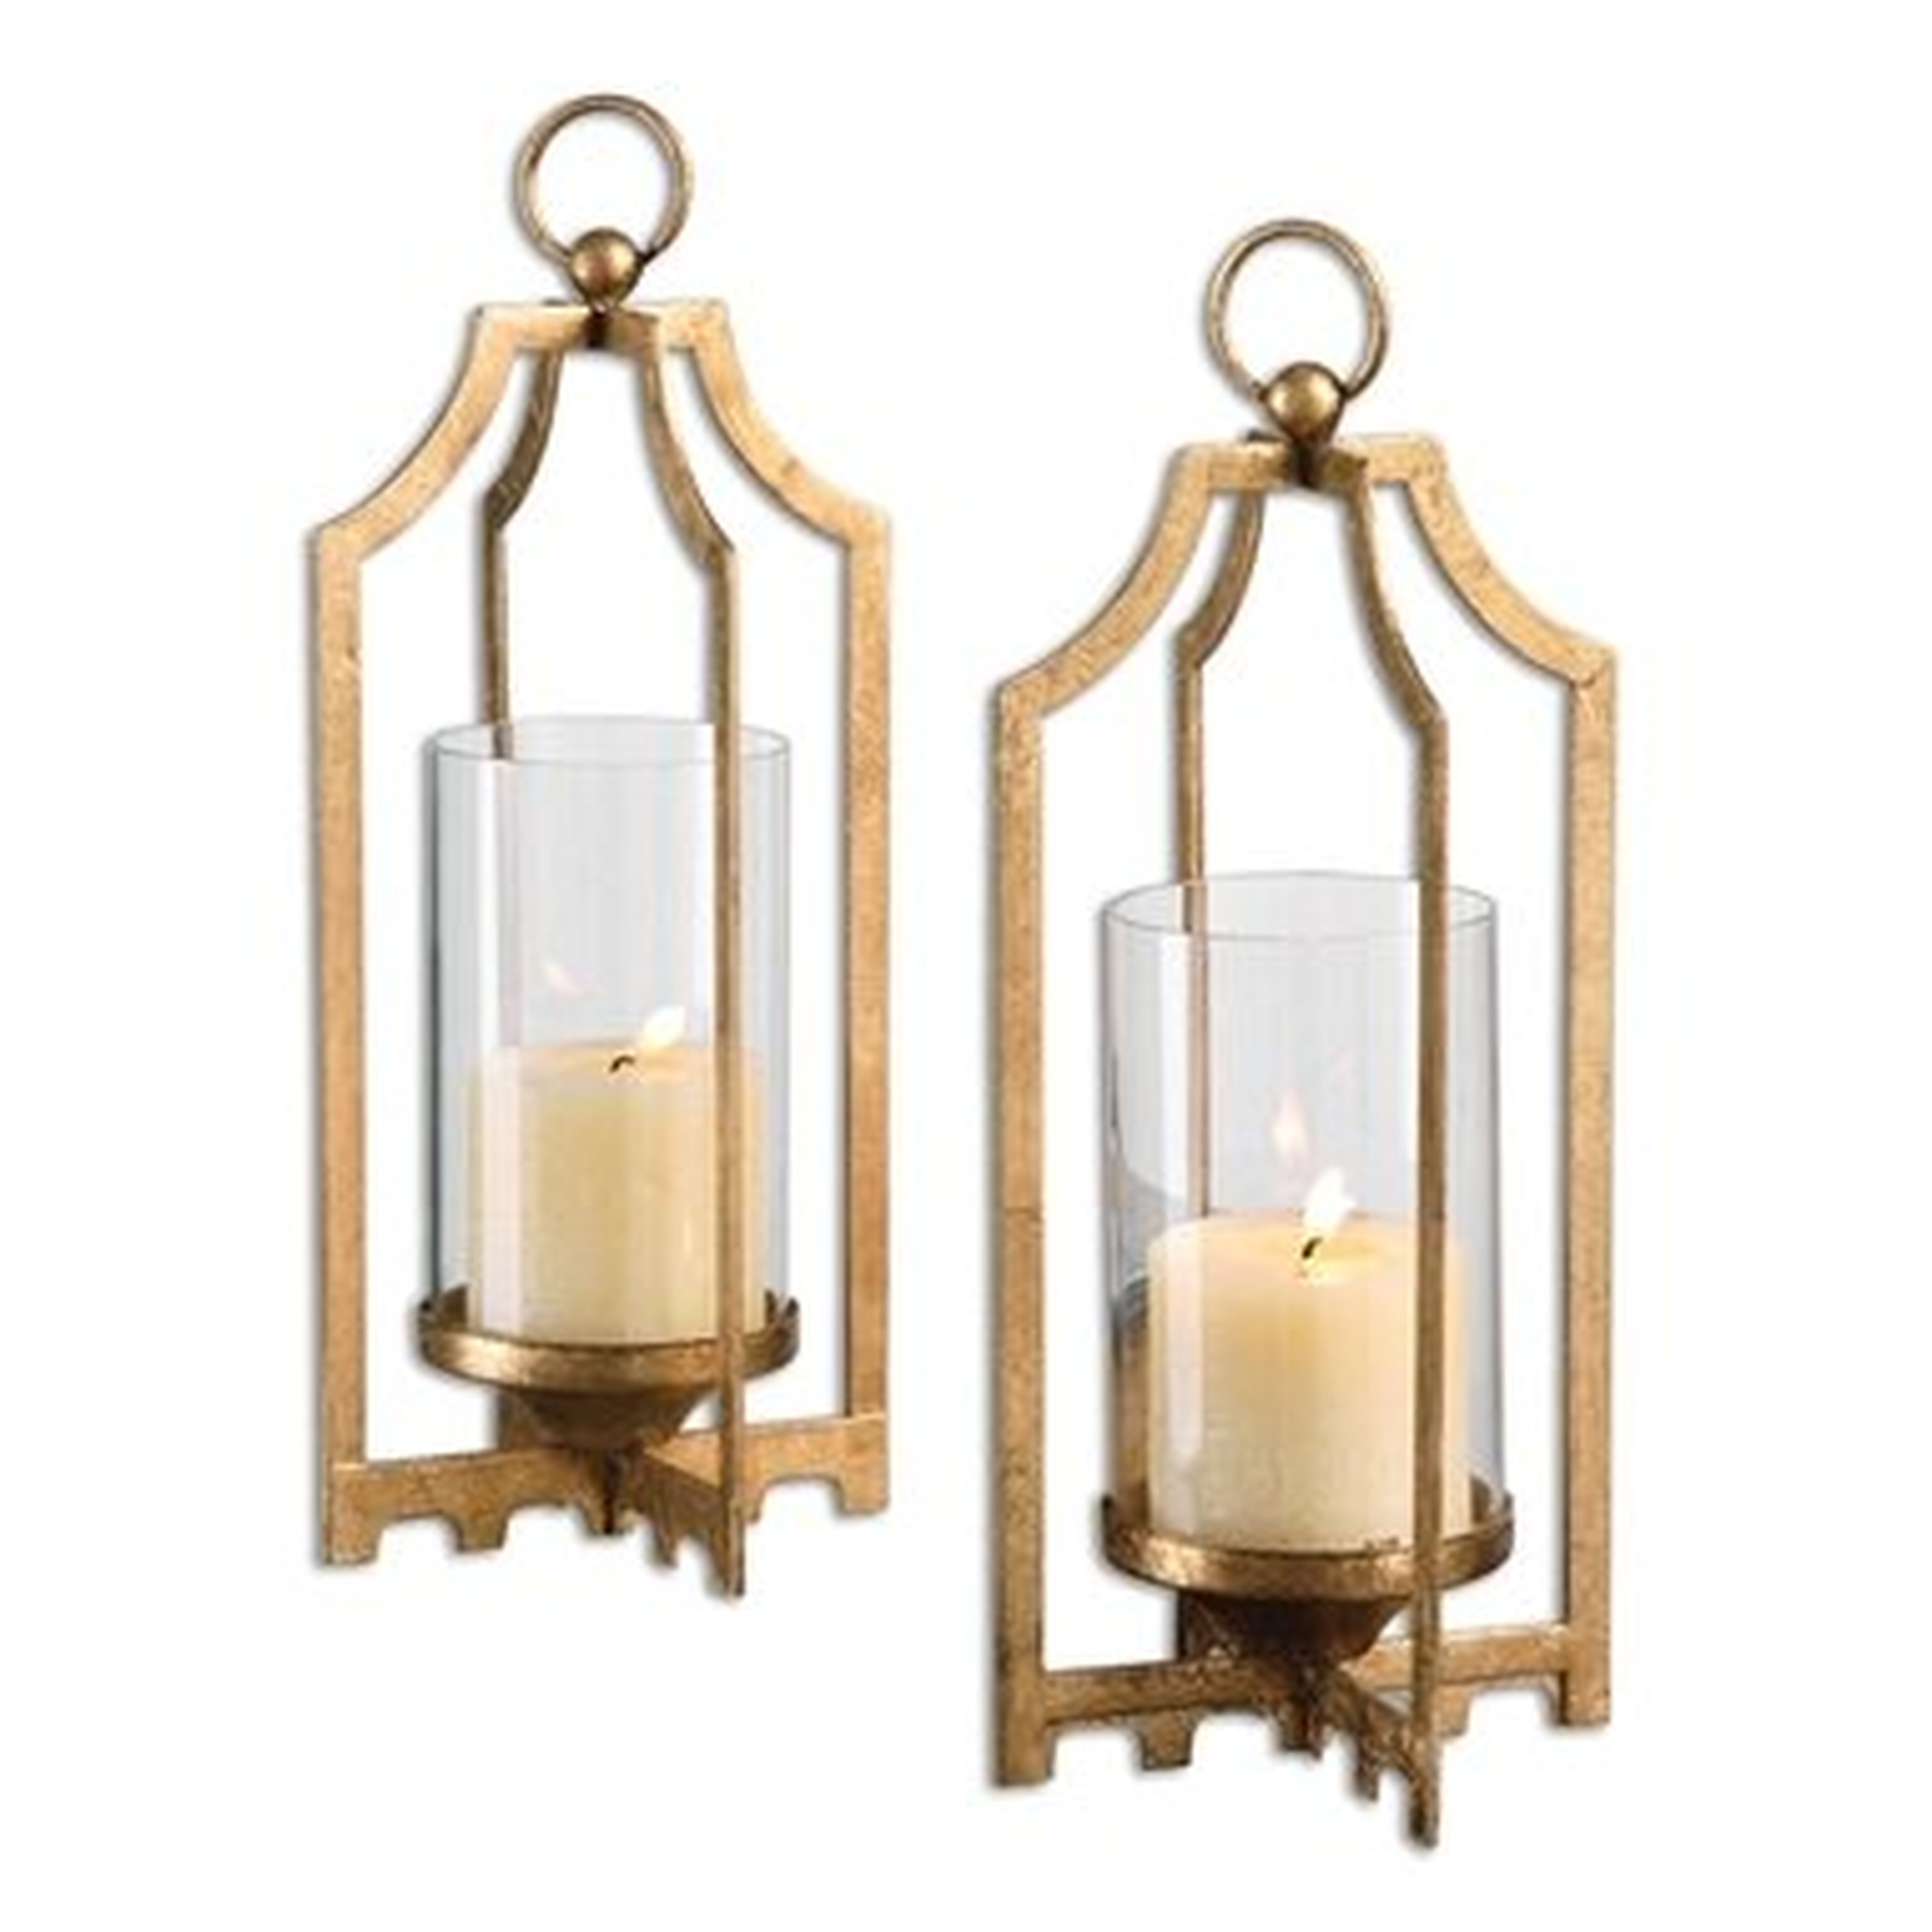 Lucy, Candleholders, S/2 - AVAIL: FEB 14, 2022 - Hudsonhill Foundry